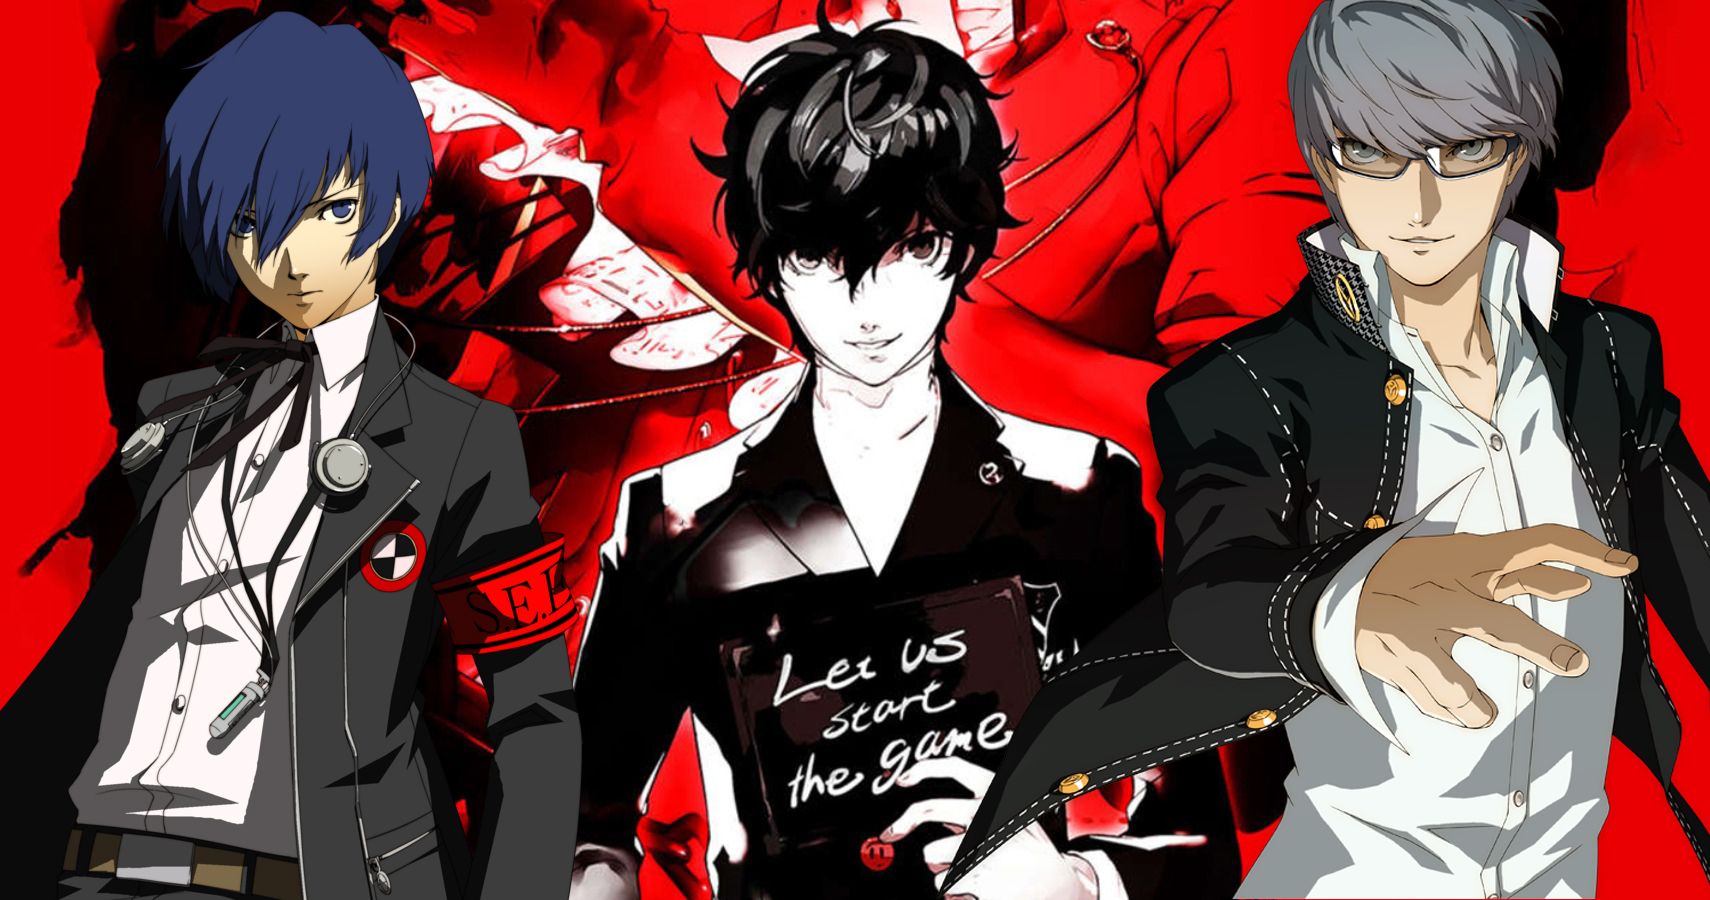 Persona 5 Royal DLC Will Include The Protagonists Of Persona 3 & Persona 4